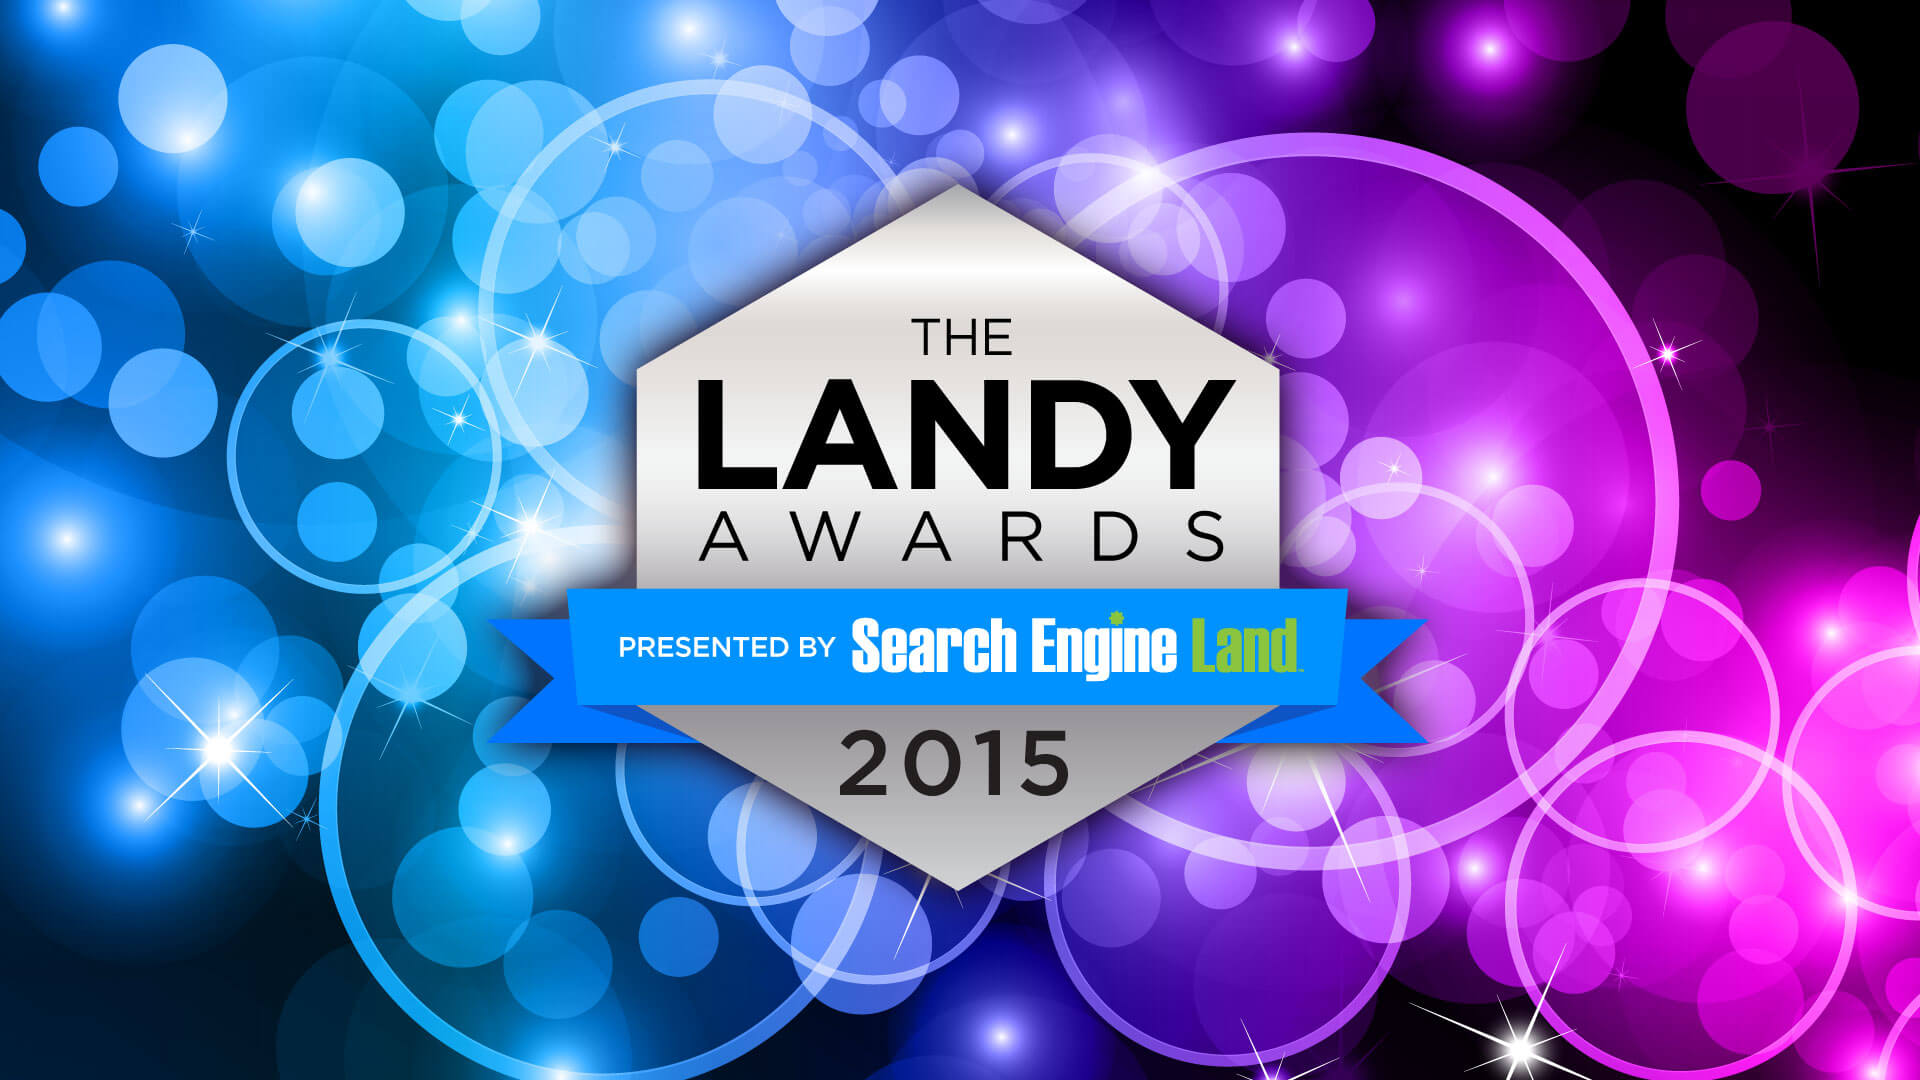 The Search Engine Land Awards - #TheLandys